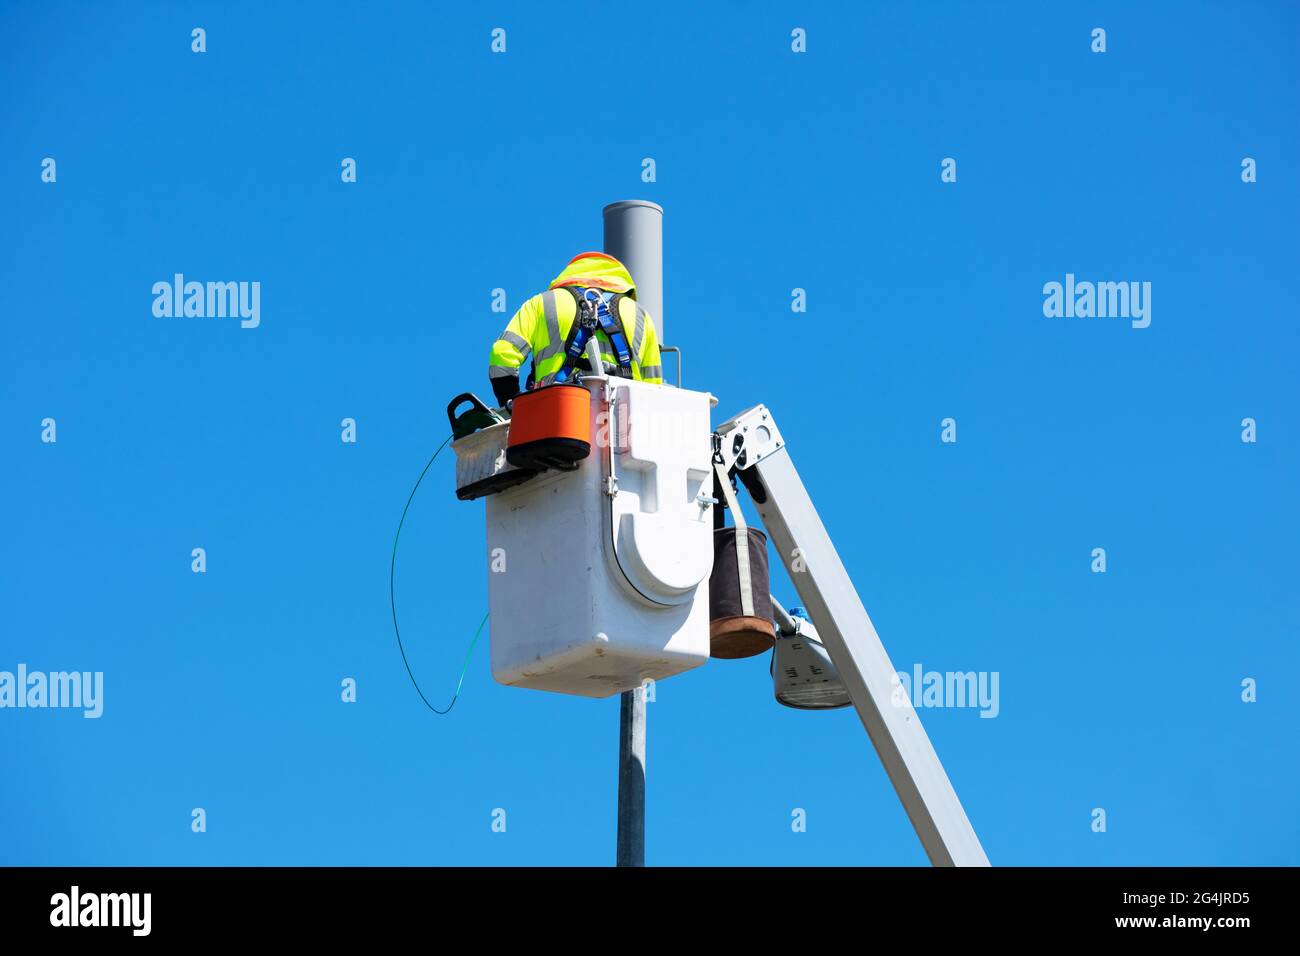 Technician works on installing or repairing a small cell antenna on a lamp post from the platform of the telescopic boom lift. Blue sky. Stock Photo